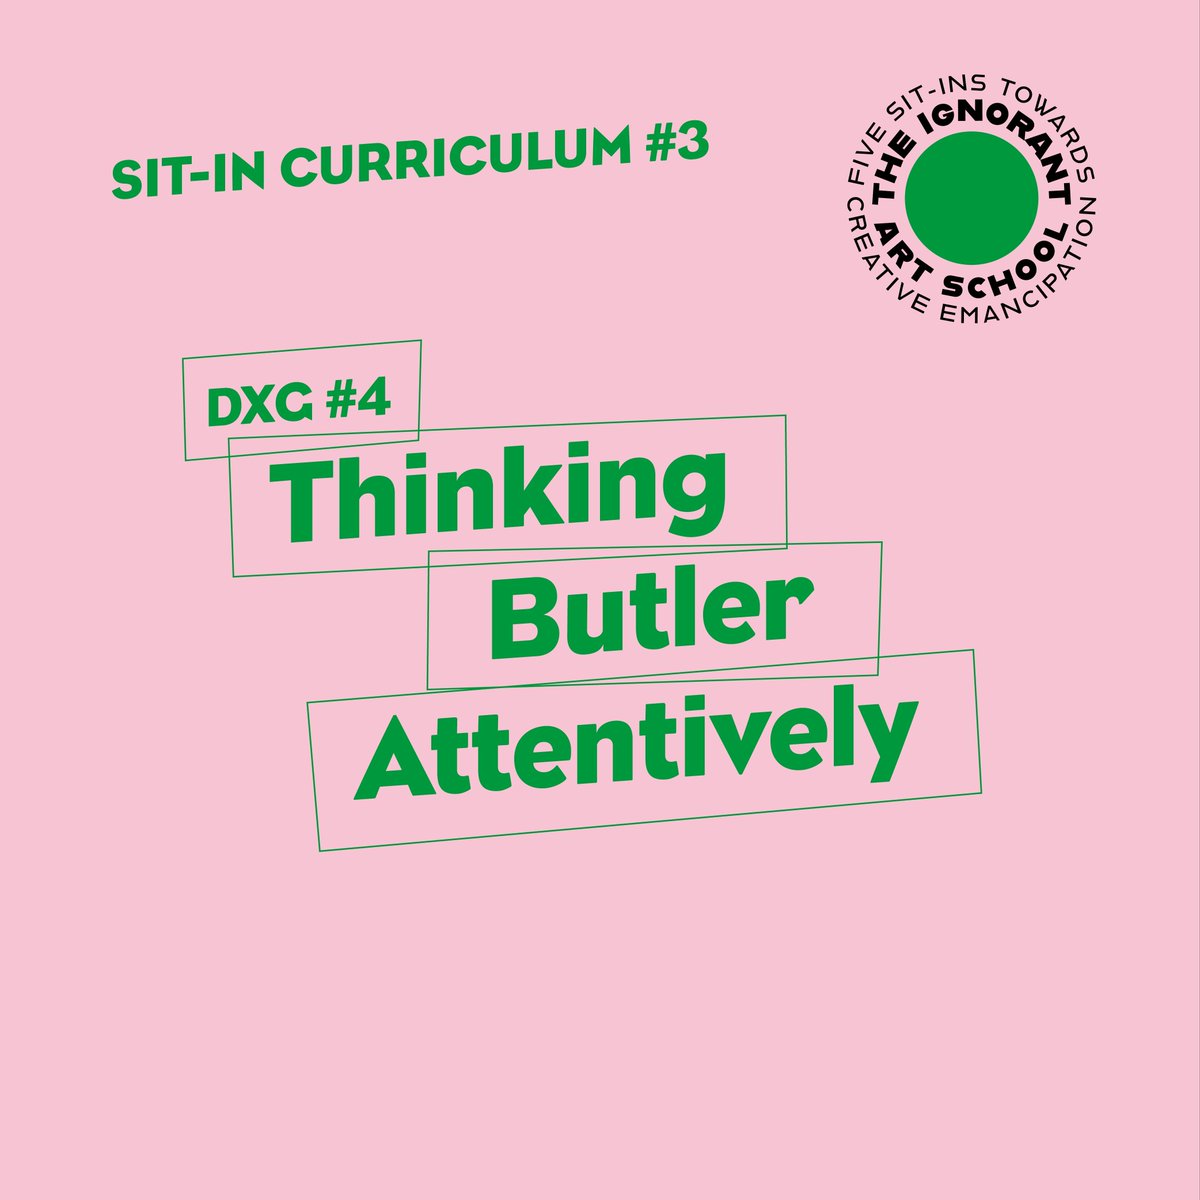 📖 
DXG #4: Thinking Butler Attentively 
Thursday 23 Nov, 6.30–8PM

Reading from Octavia Butler’s 'Wild Seed' led by @theotolithgroup and Akwugo Emejulu
____________________
This is an free online event, sign up > buff.ly/3RRBORU 

@DJCAD #DJCADCommunity